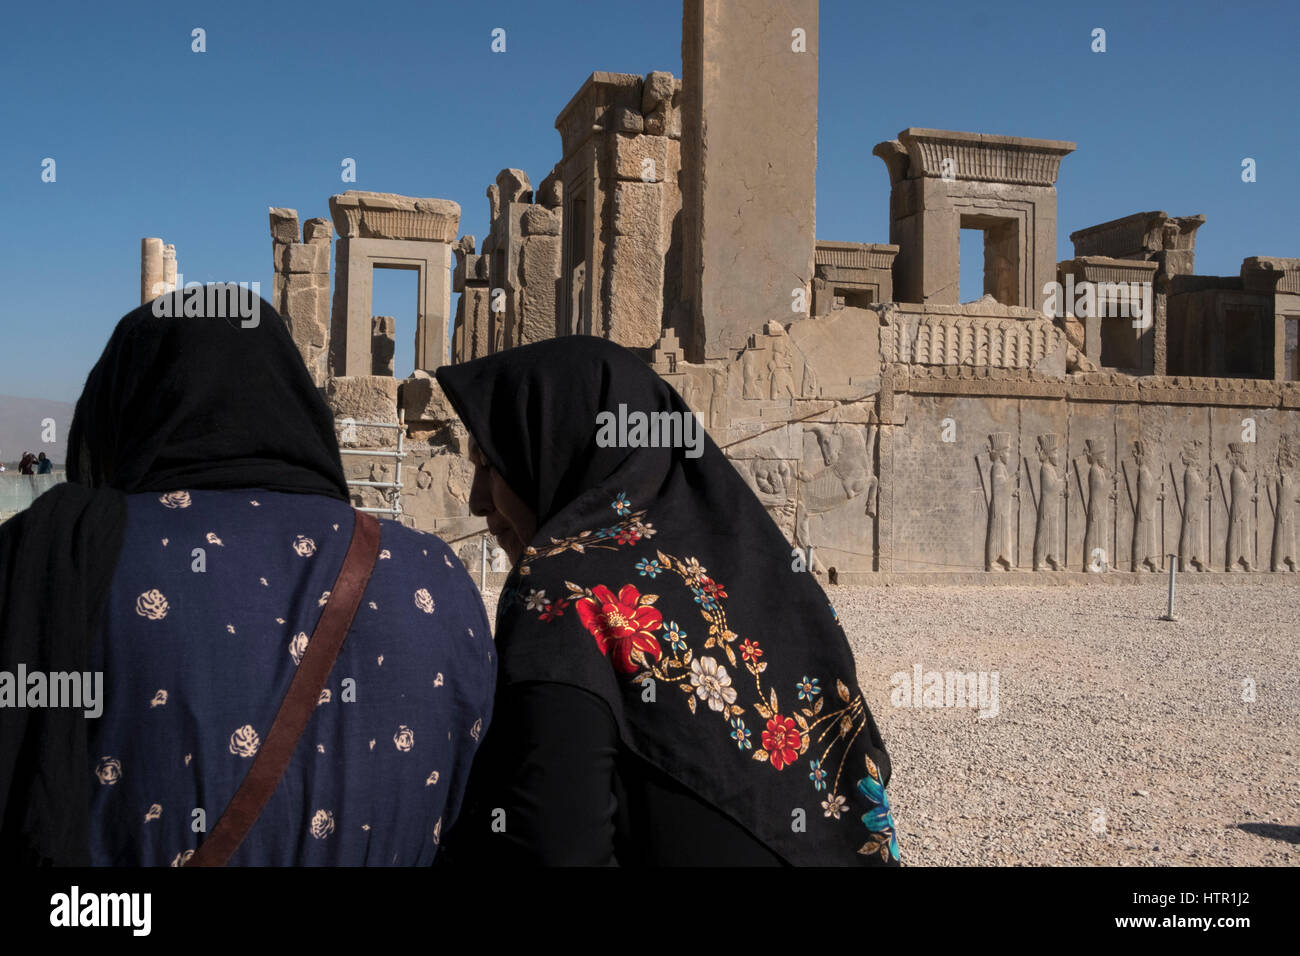 Middle aged women rest in front of ruins at the ancient city of Persepolis, Fans, Province, Iran. Stock Photo